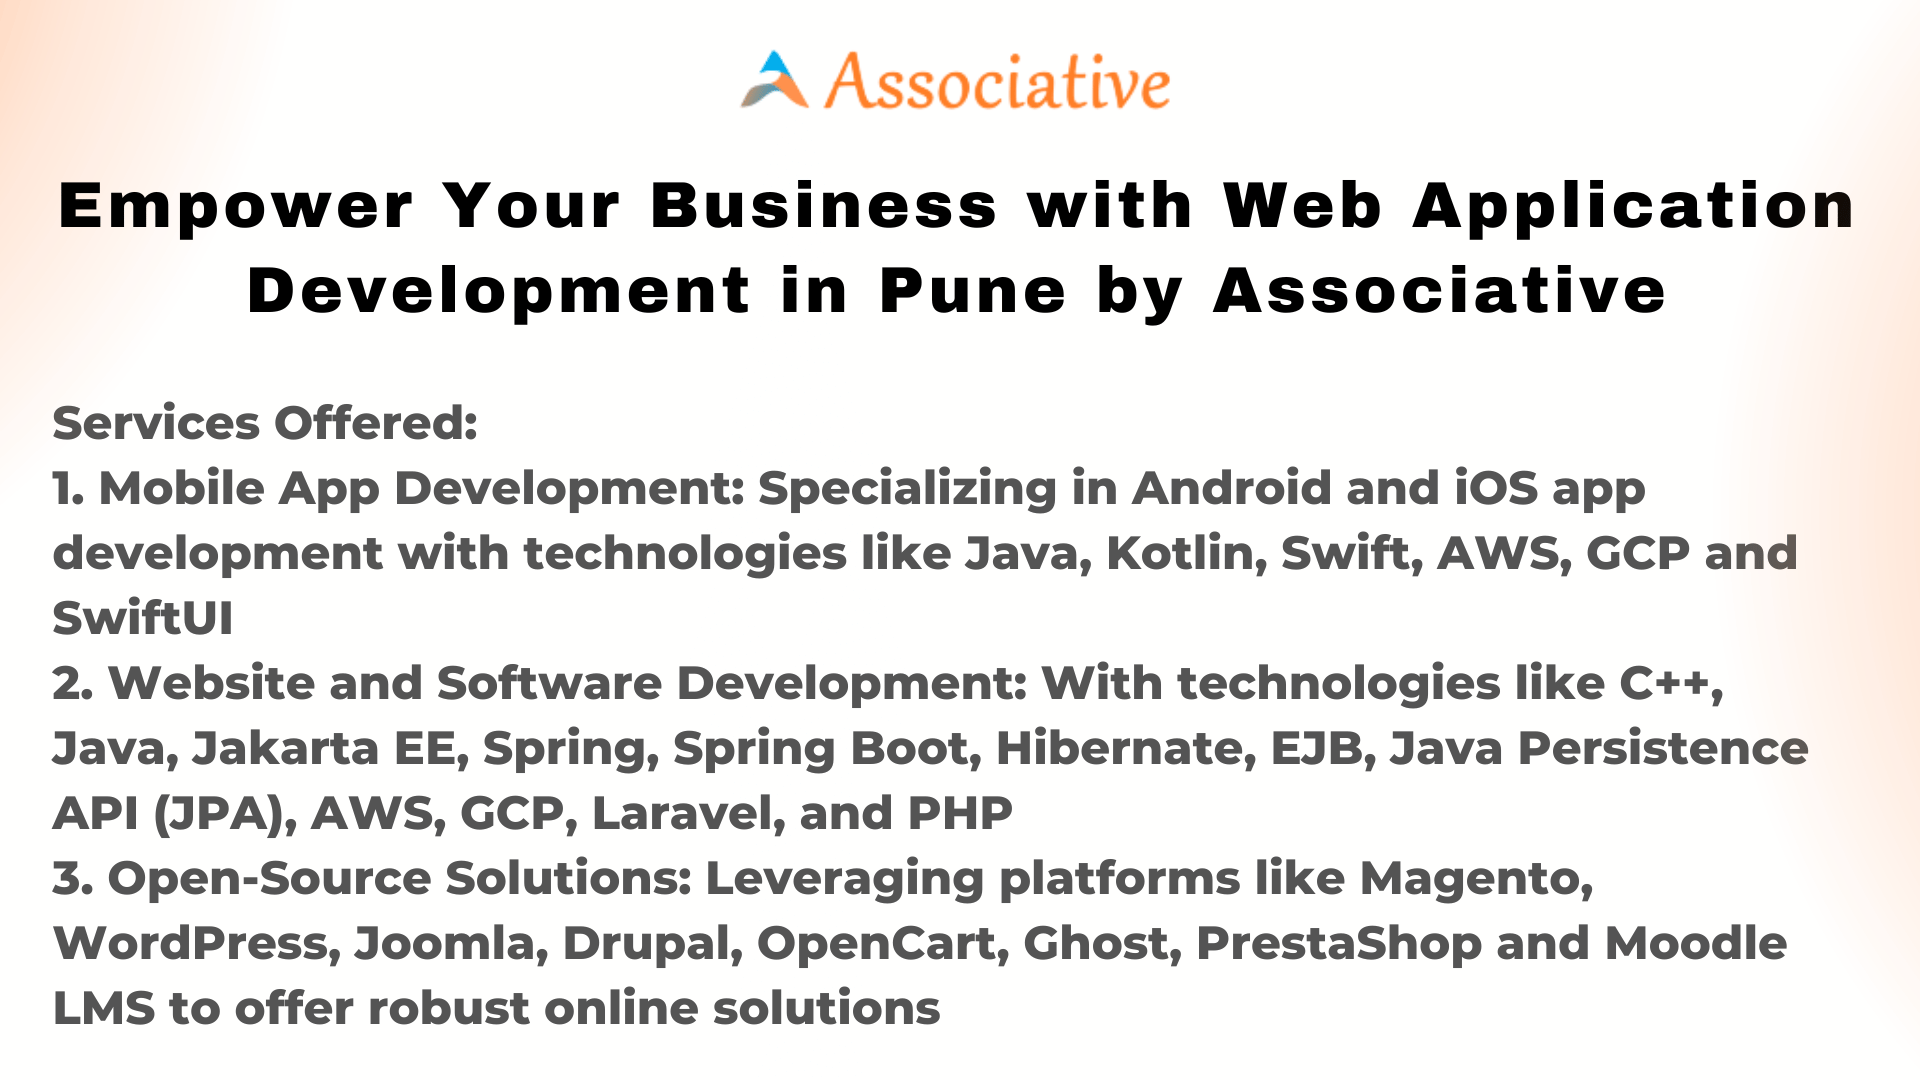 Empower Your Business with Web Application Development in Pune by Associative